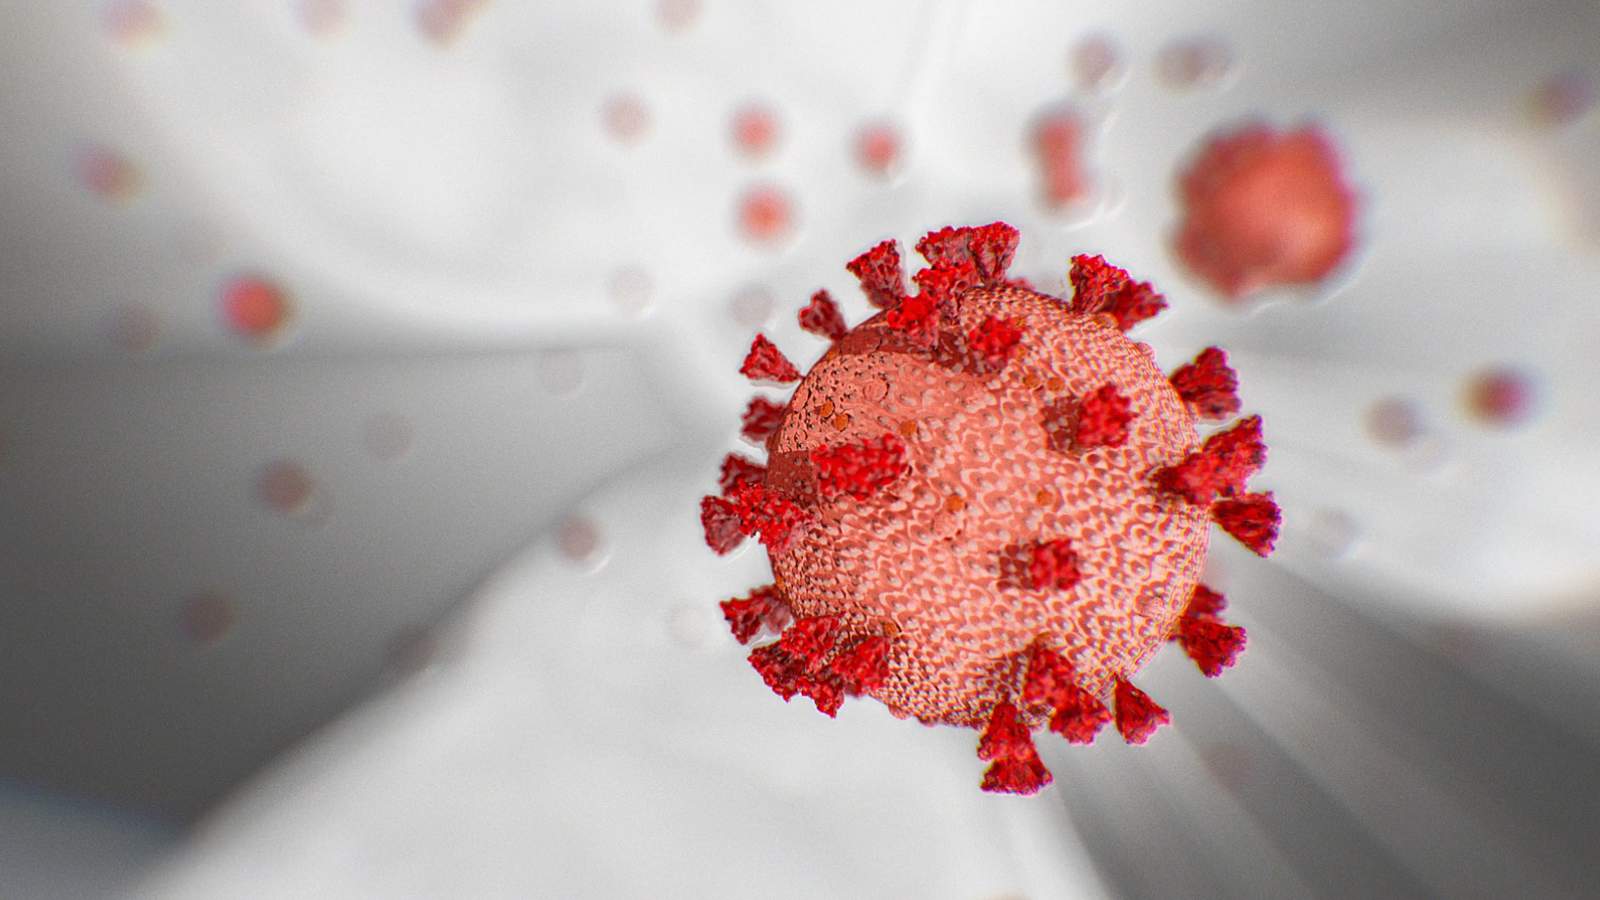 Post-COVID fibrosis a concern even for younger coronavirus patients